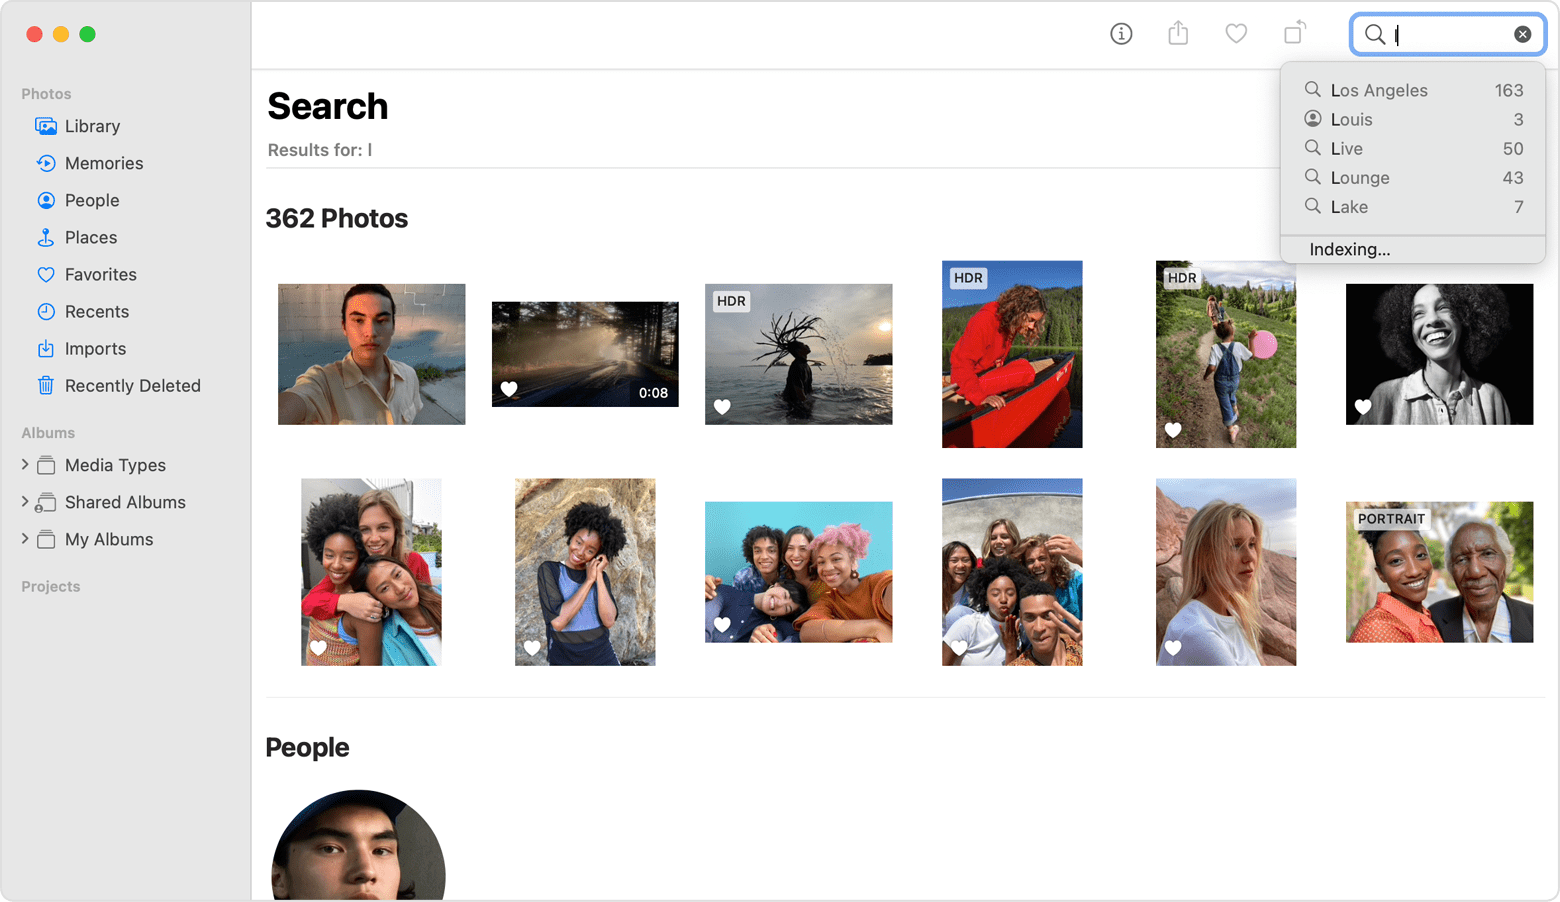 Photos window showing Search results.